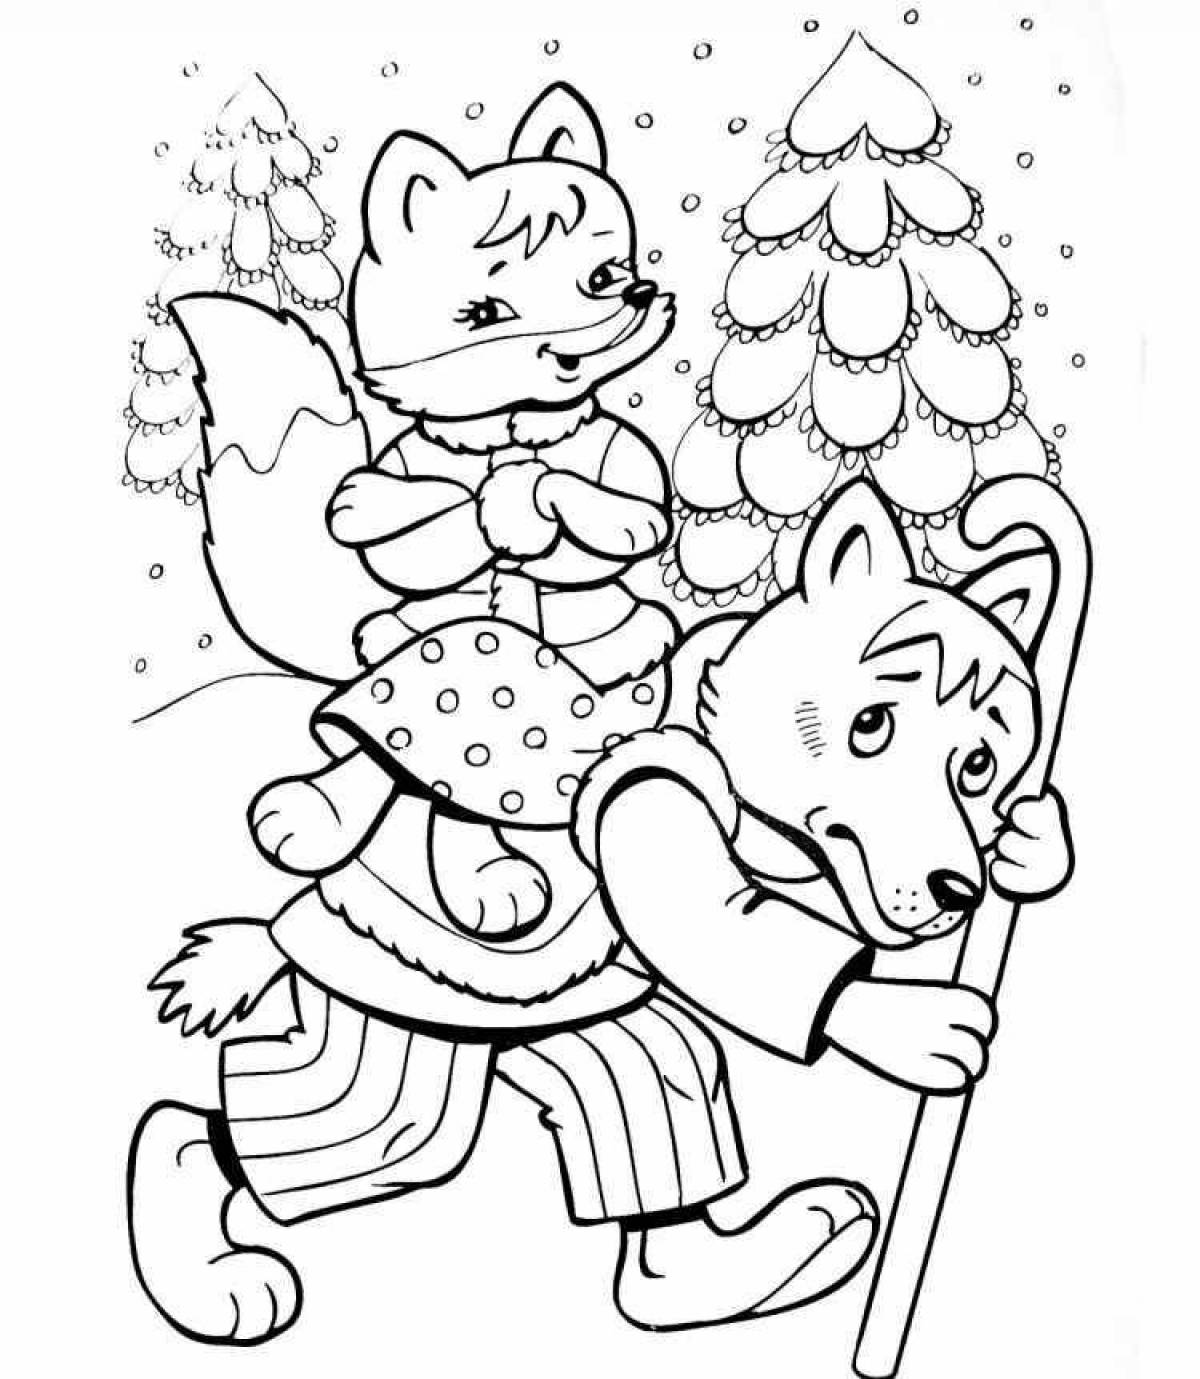 Charming coloring fairy tale fox and wolf